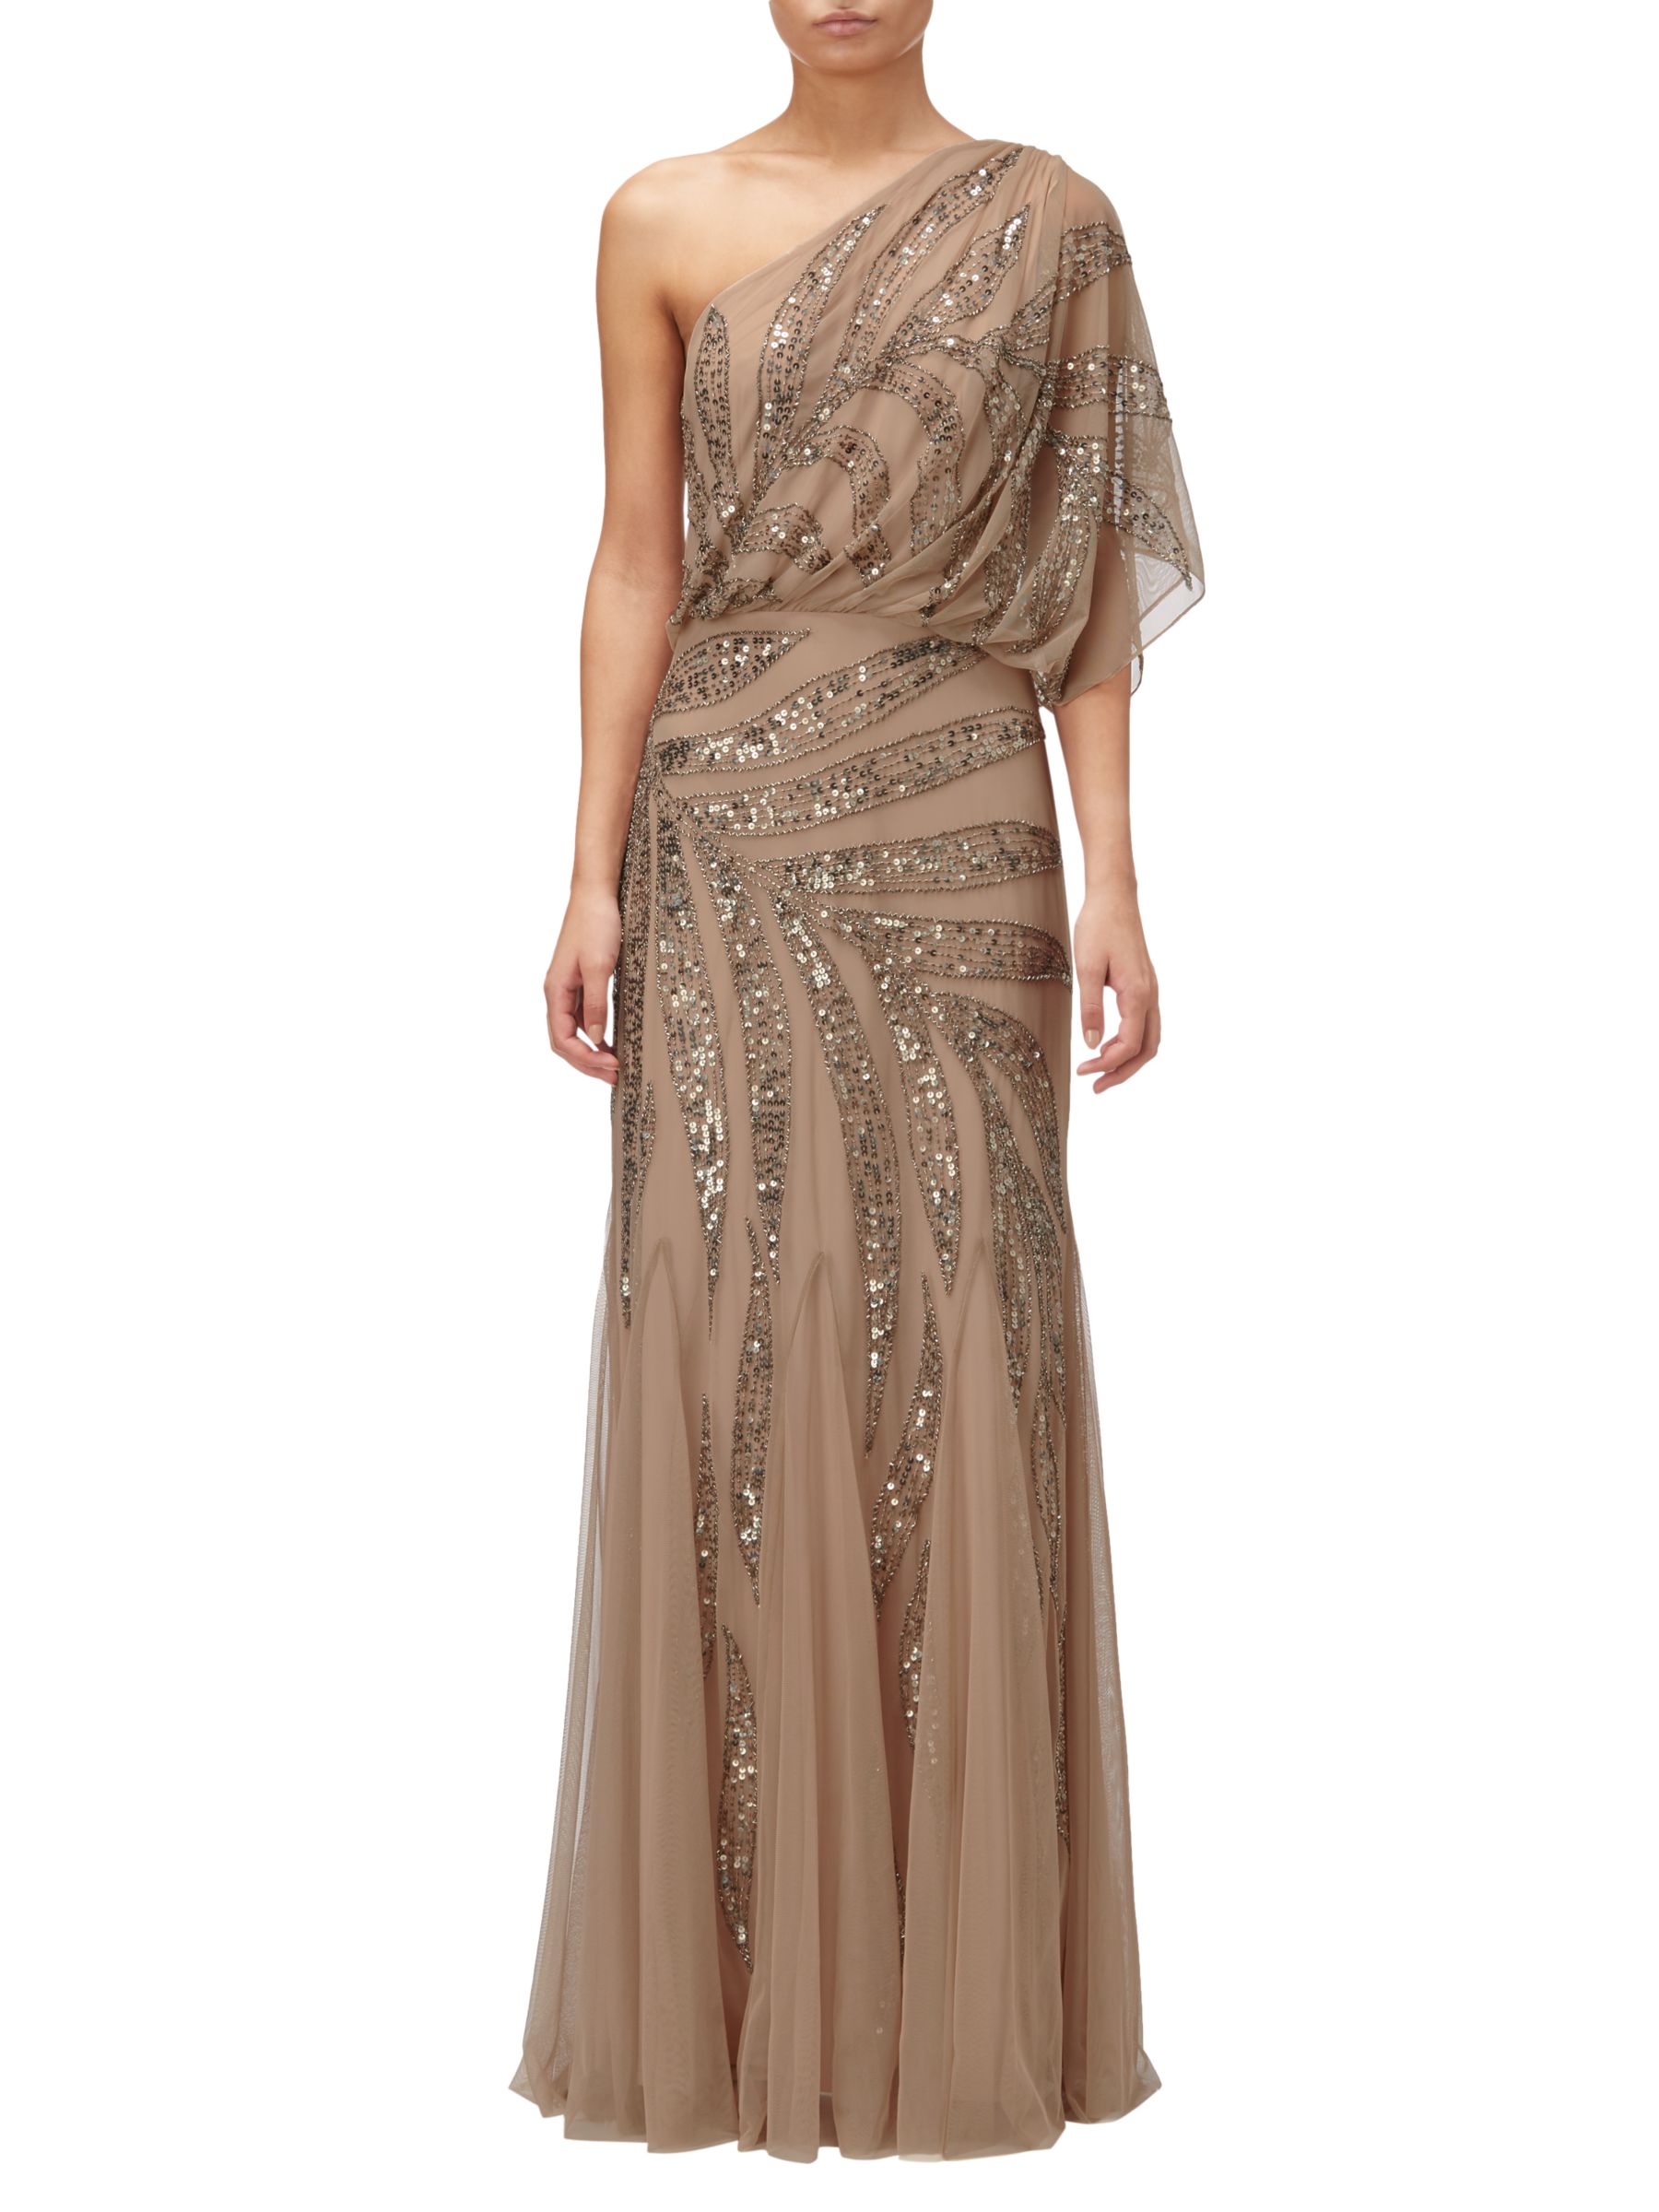 adrianna papell one shoulder beaded dress